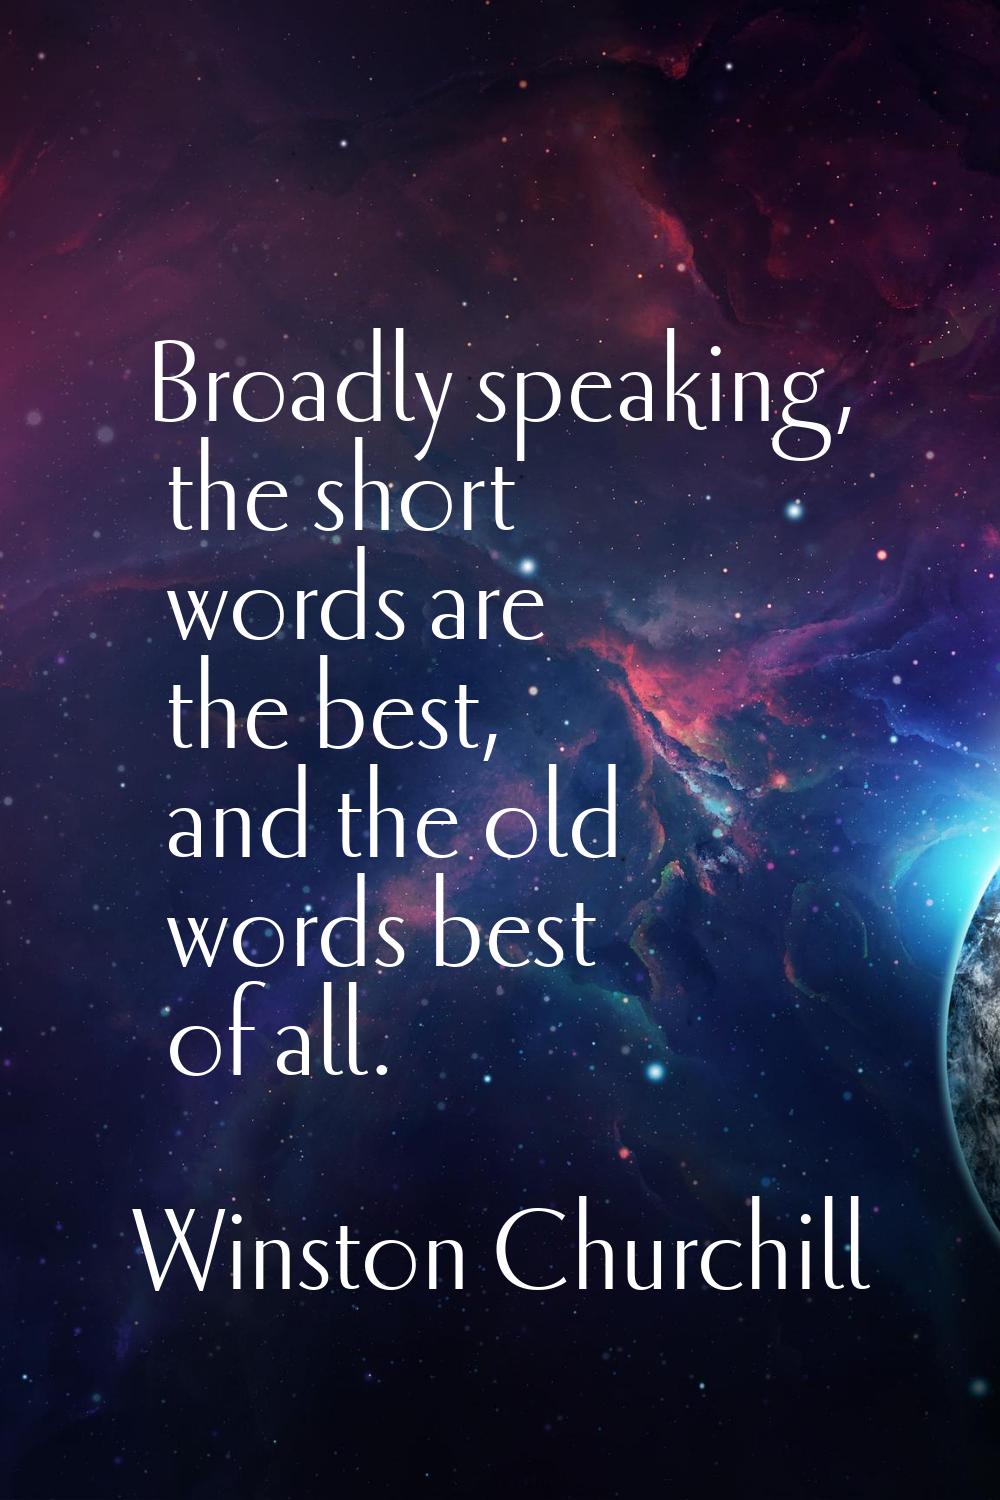 Broadly speaking, the short words are the best, and the old words best of all.